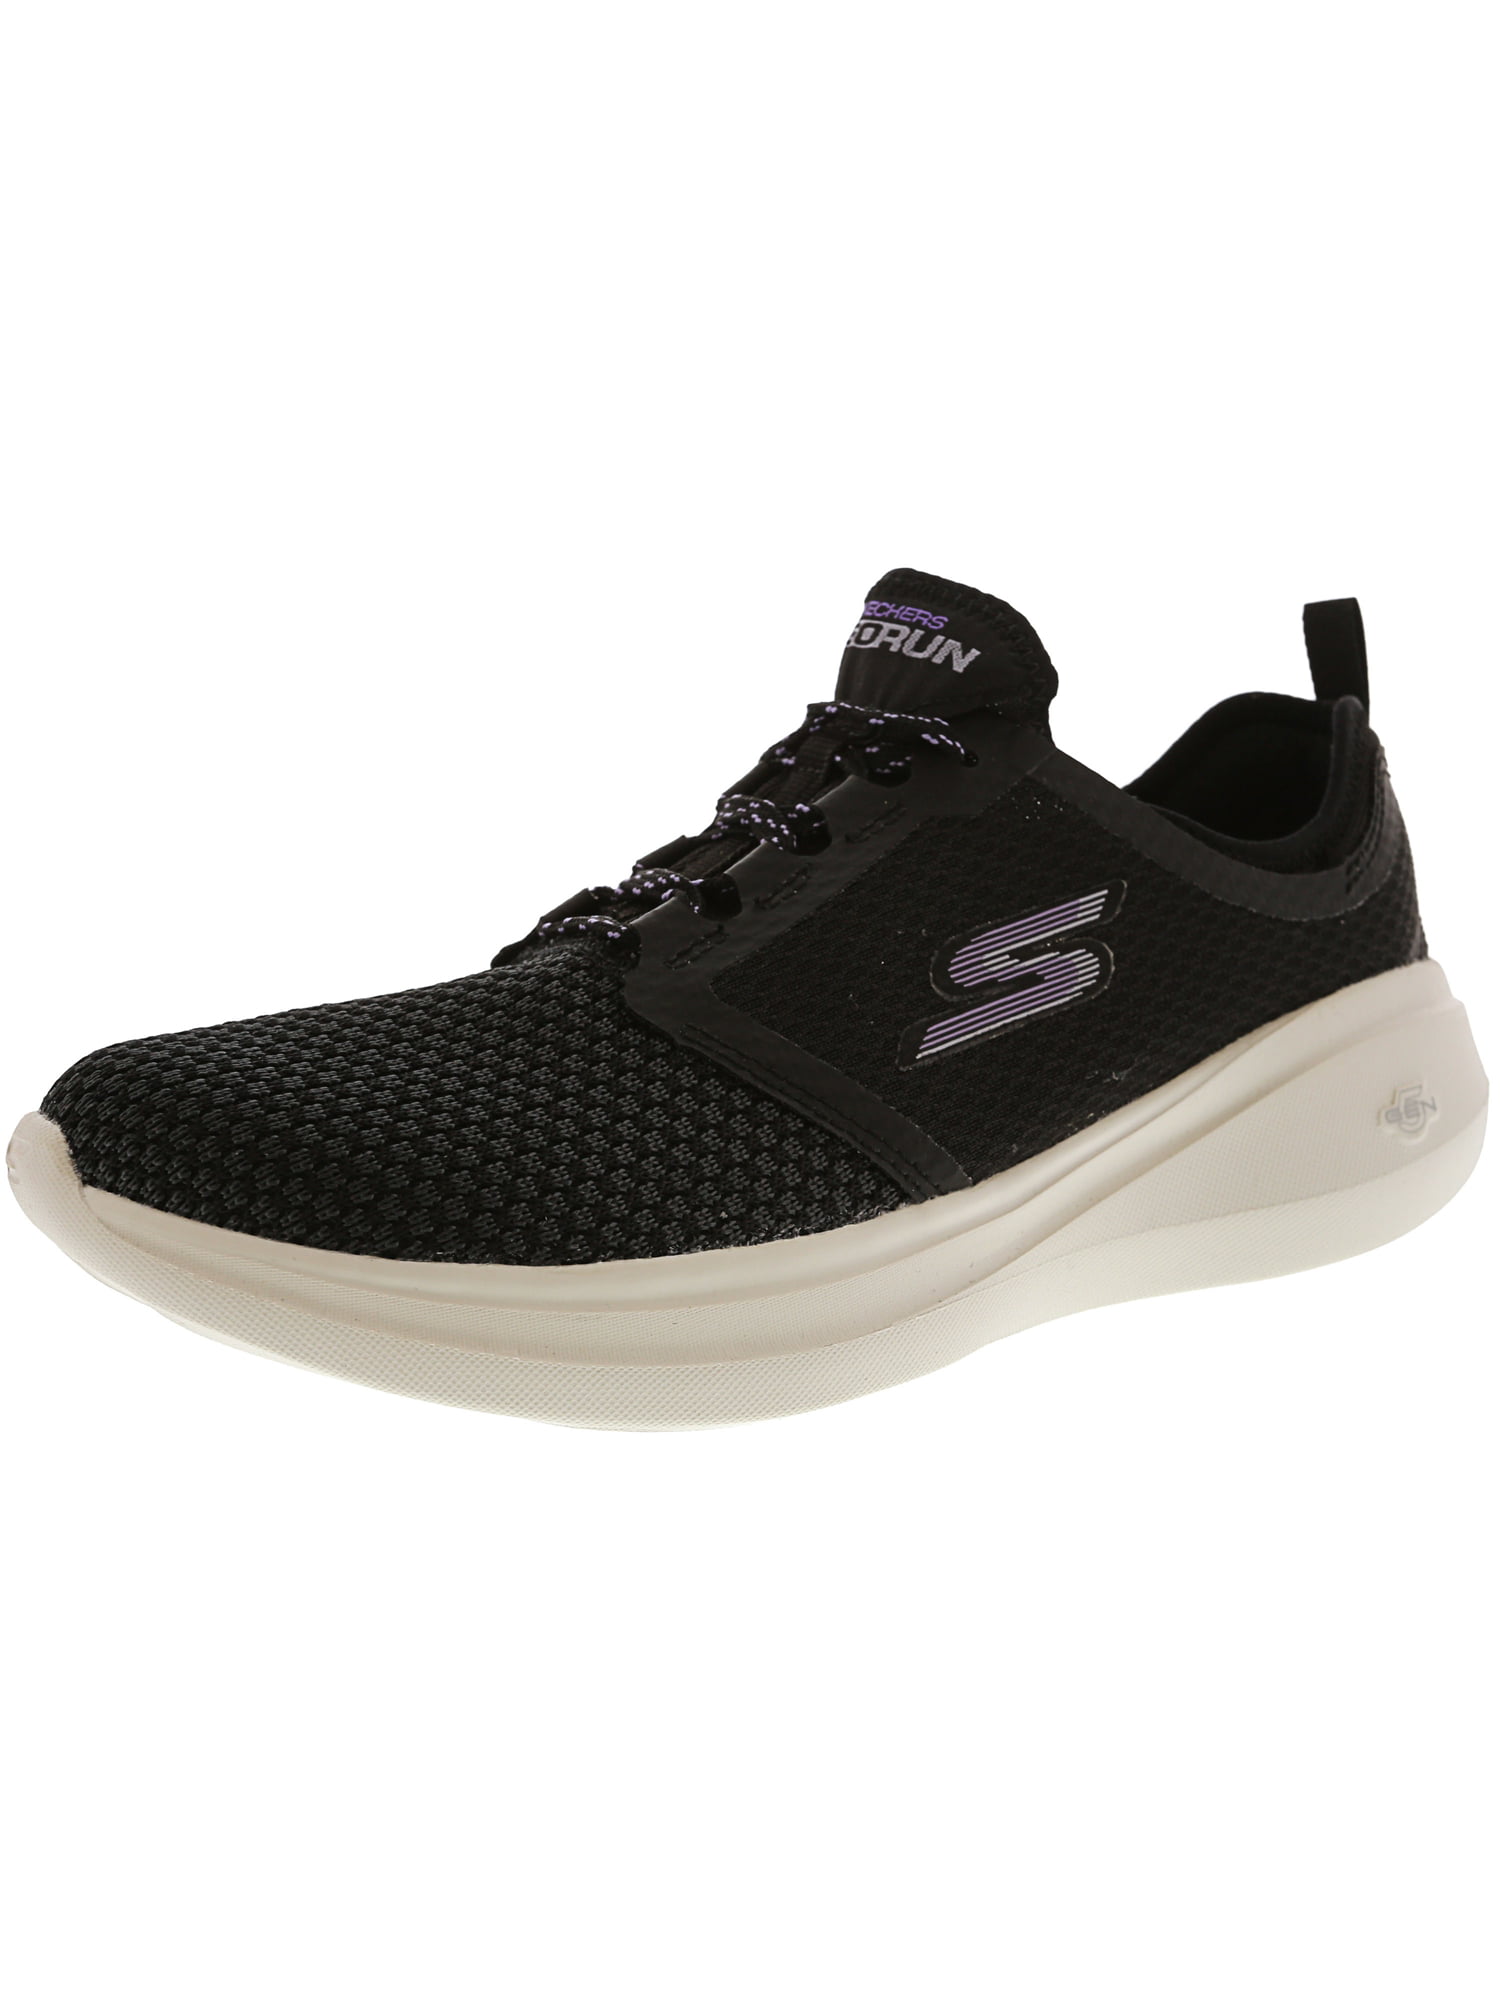 skechers high ankle shoes